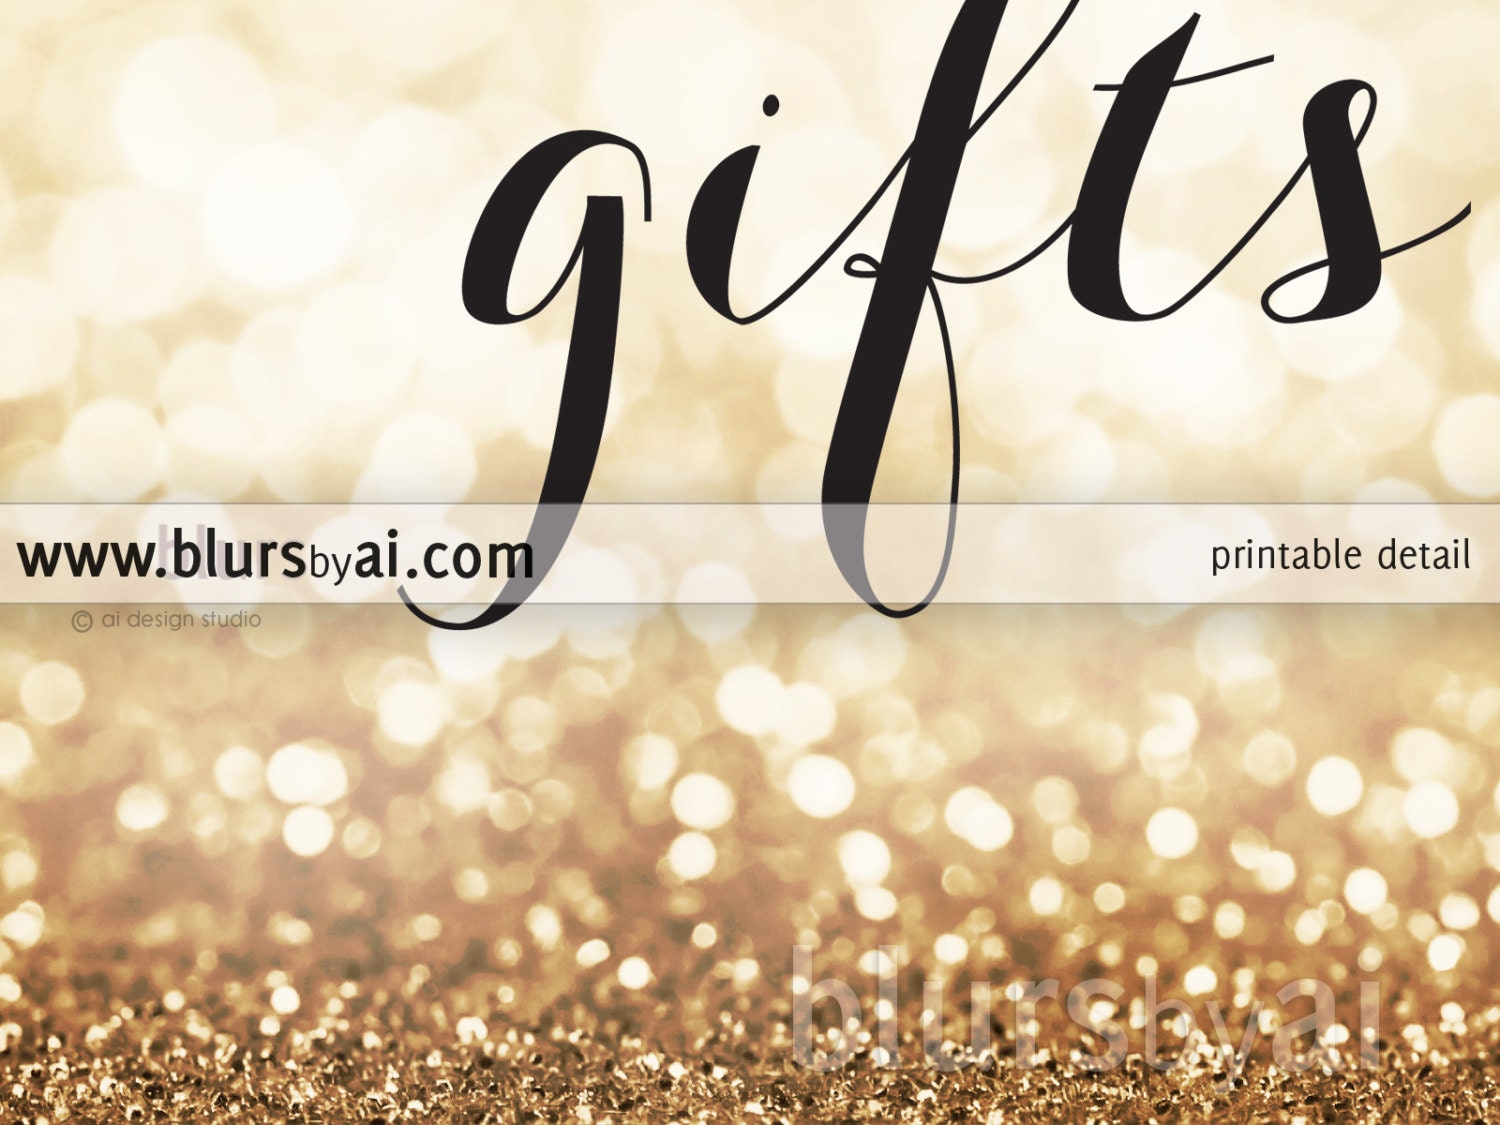 Printable sign cards and gifts rose gold gold | Etsy